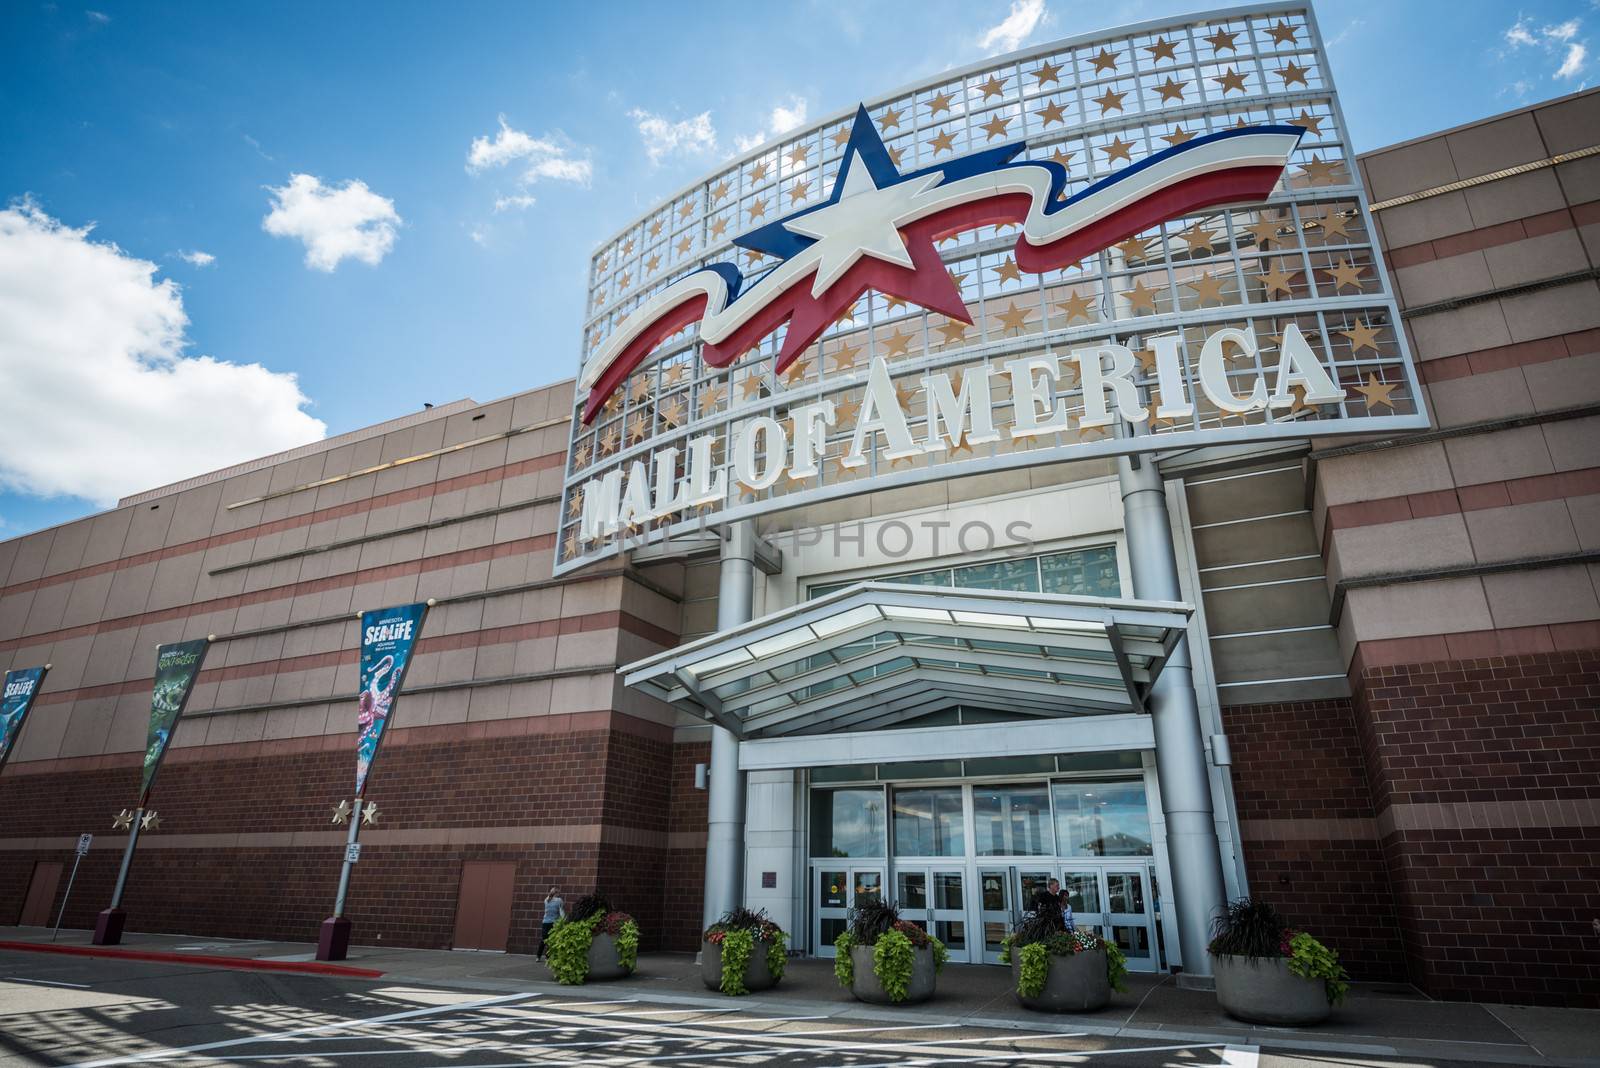 Mall of America main entrance by IVYPHOTOS